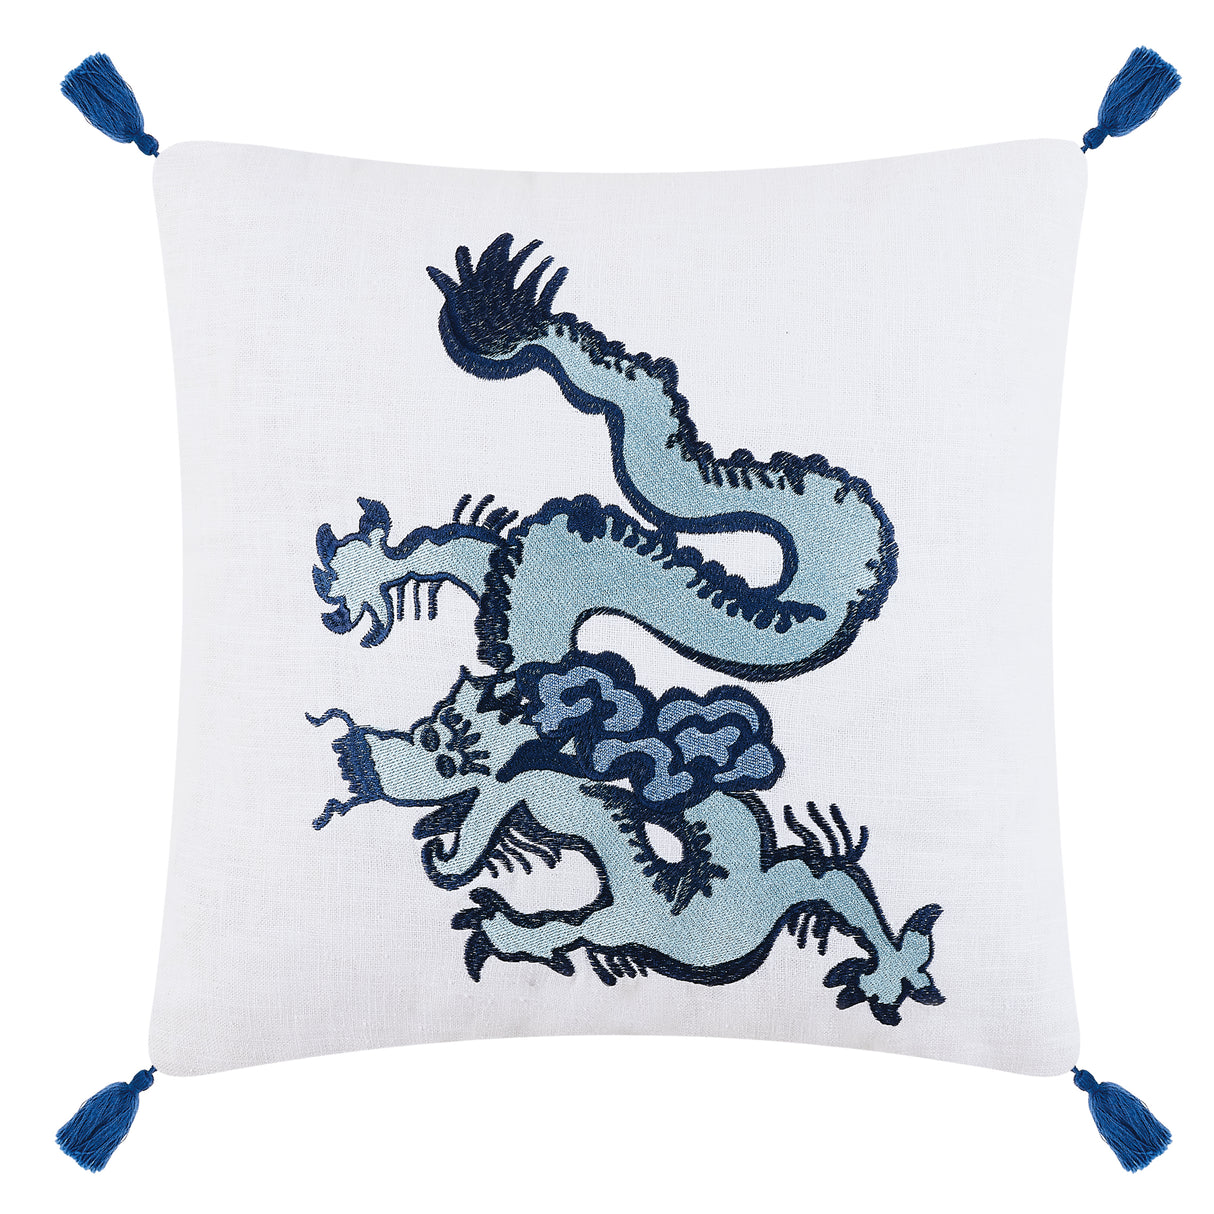 Enter the Dragon Embroidered 18" Square Pillow